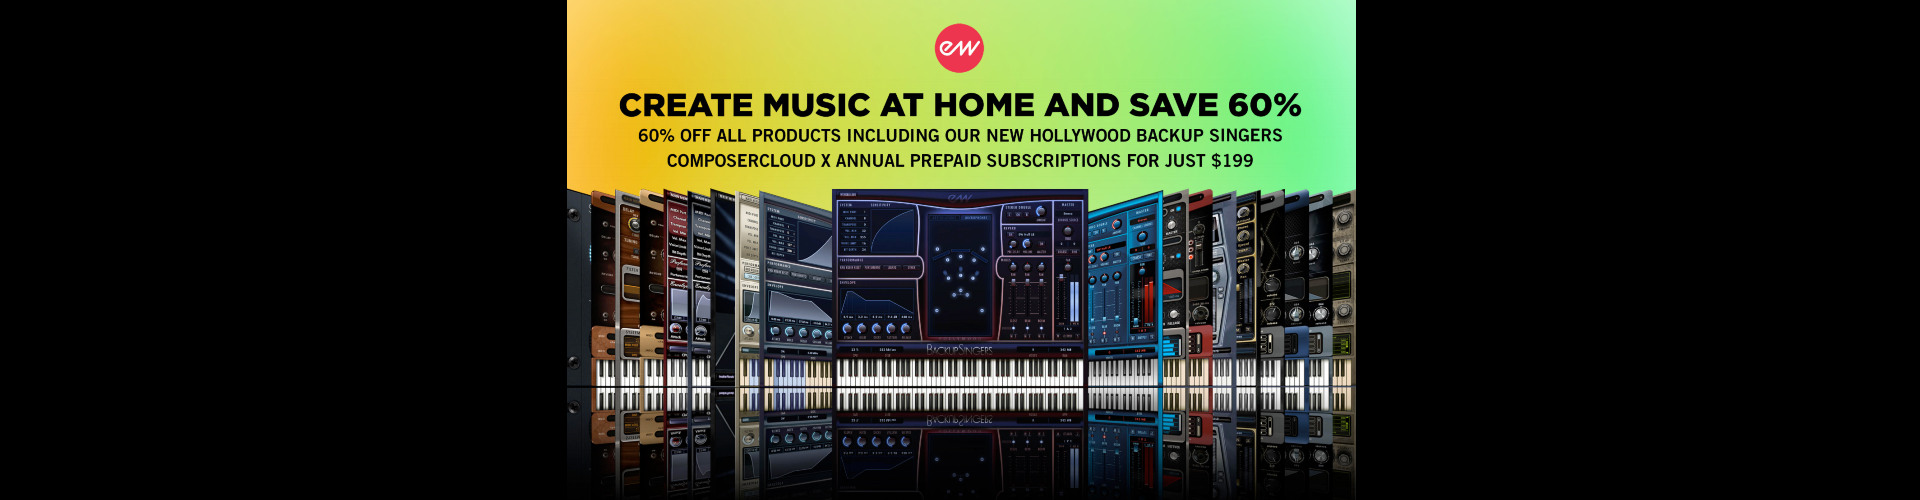 EastWest Create at Home and Save 60%